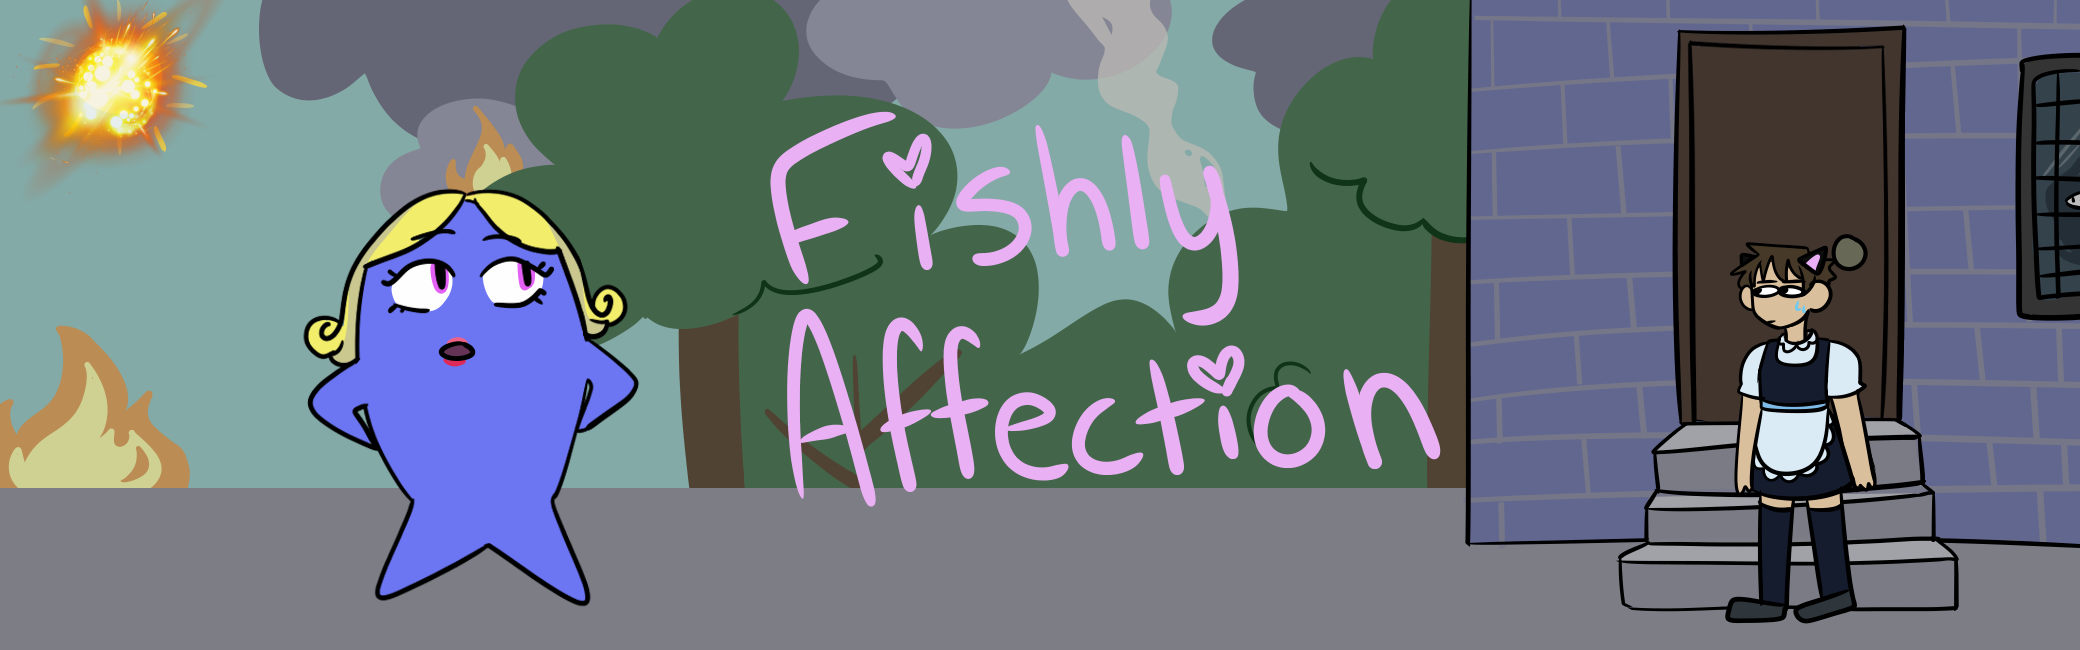 Fishly Affection